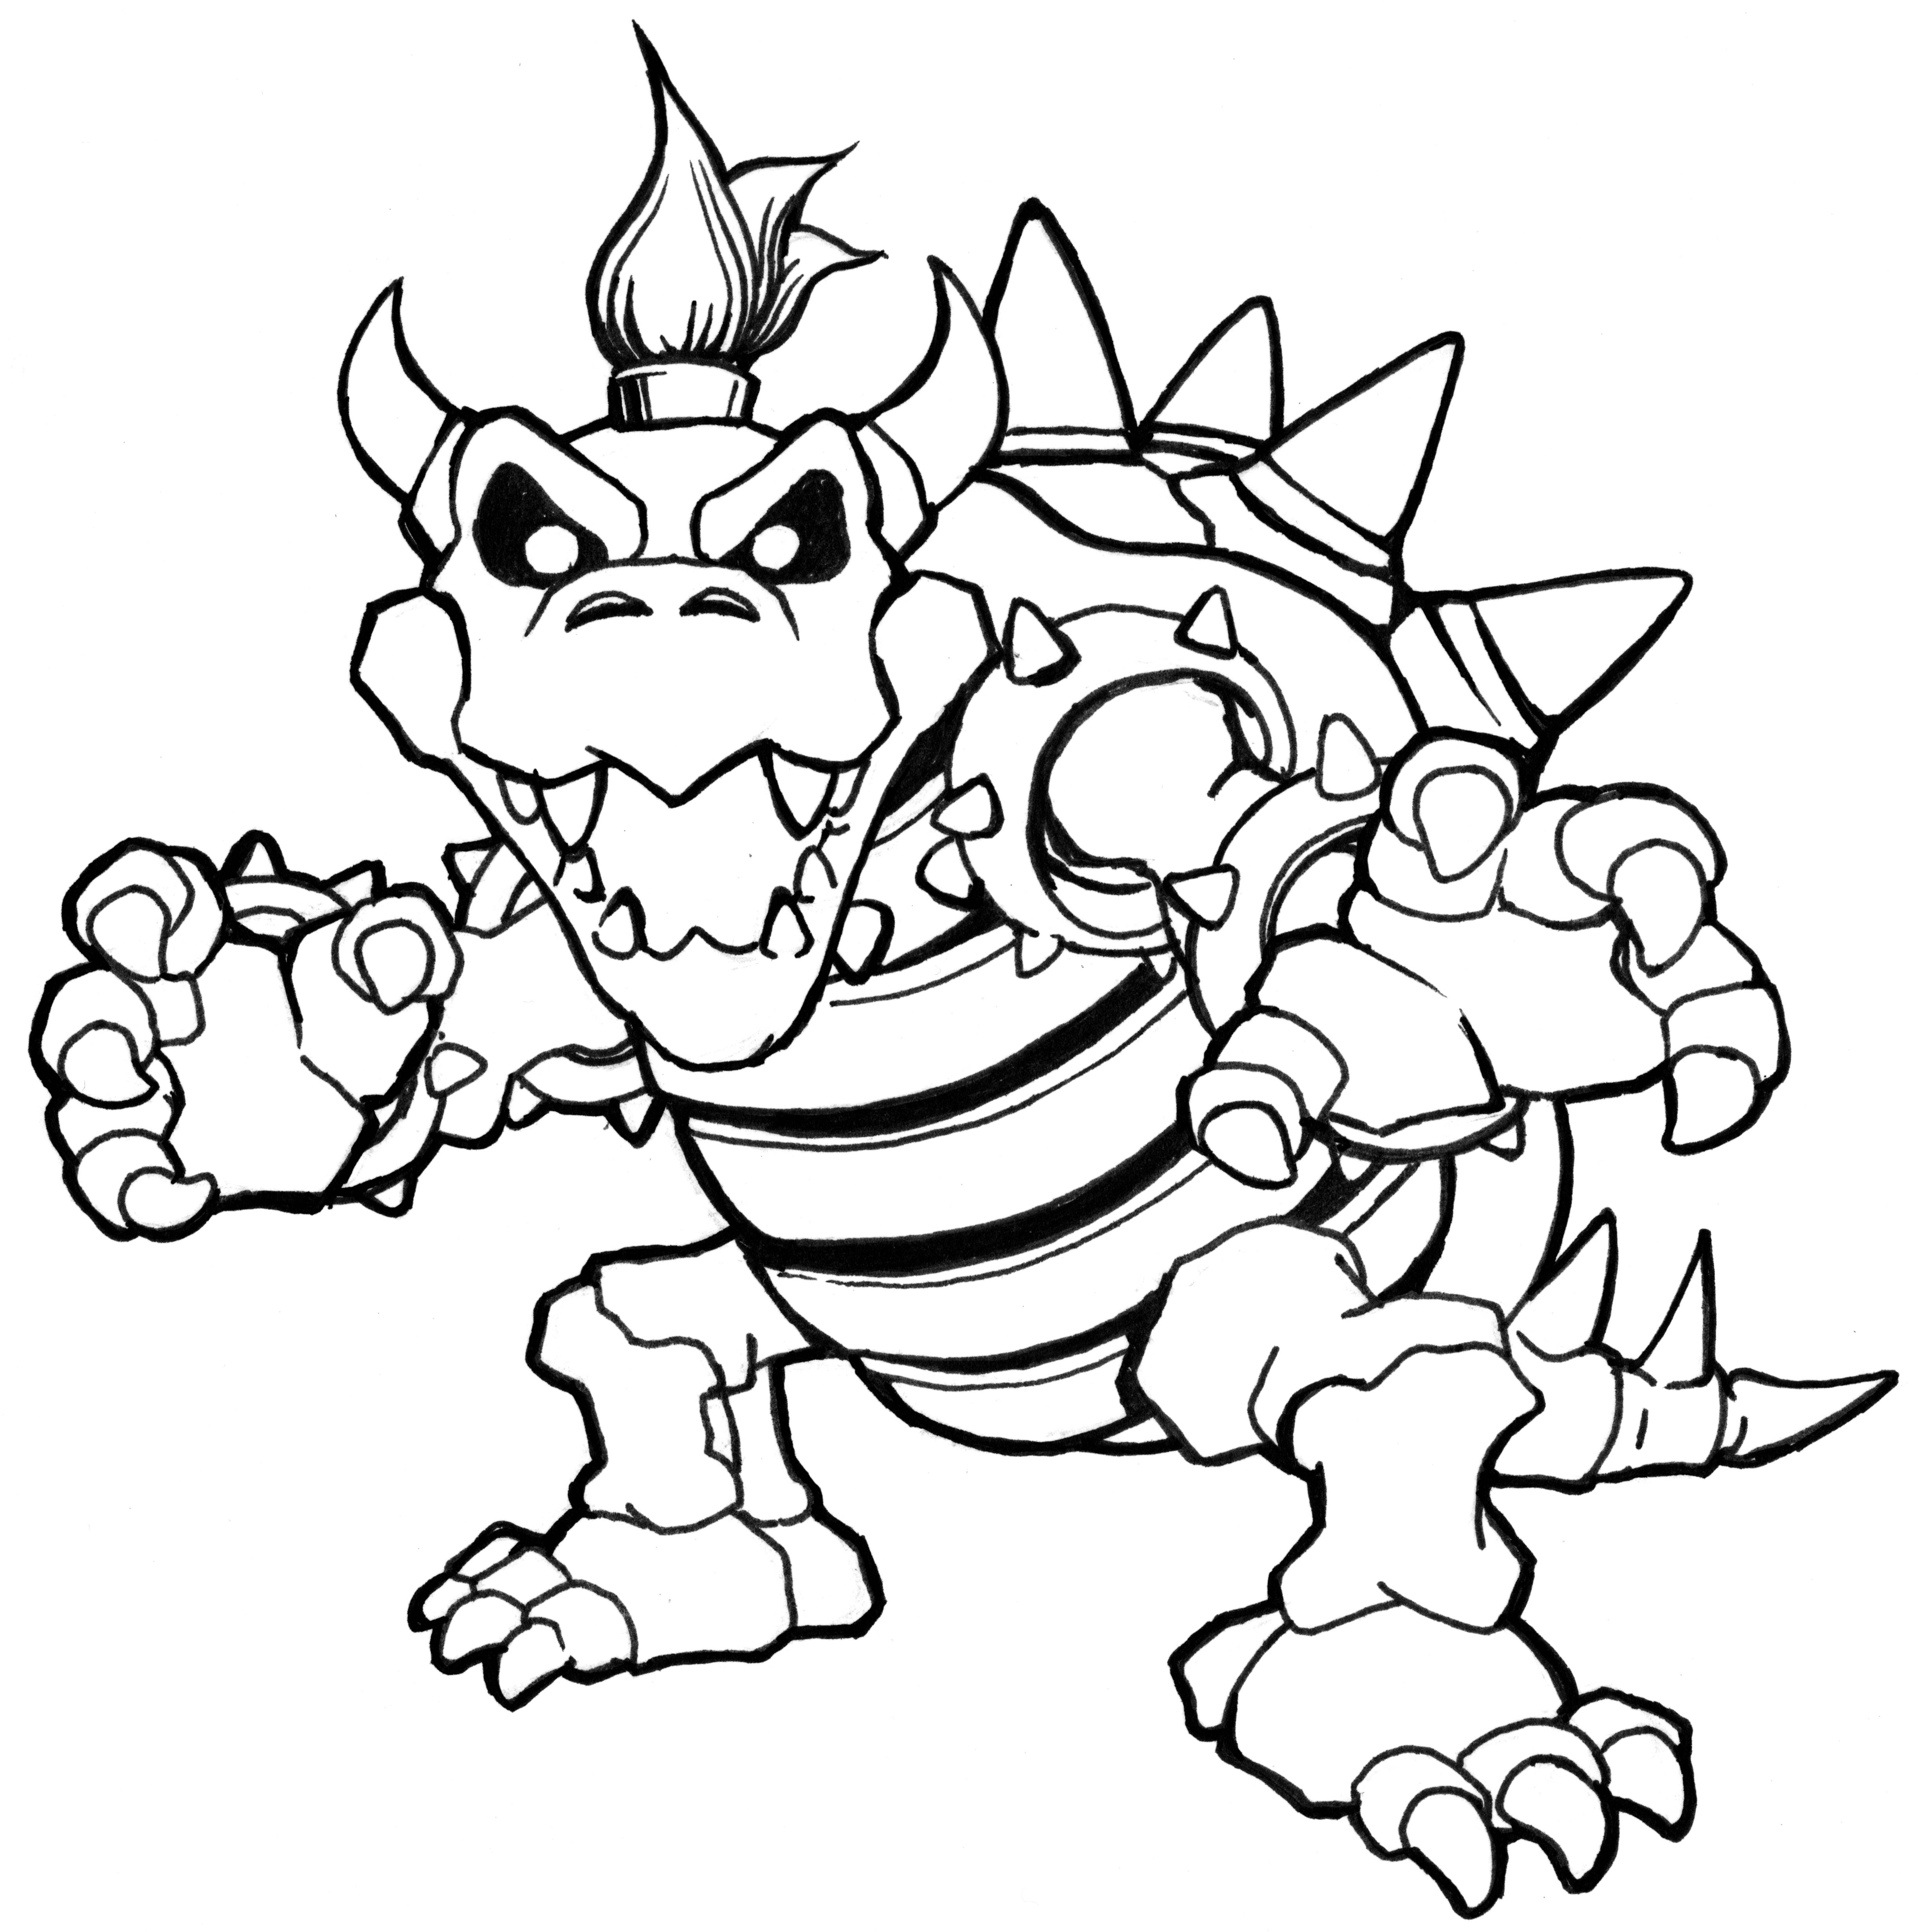 Bowser Coloring Page Excellent Coloring Home